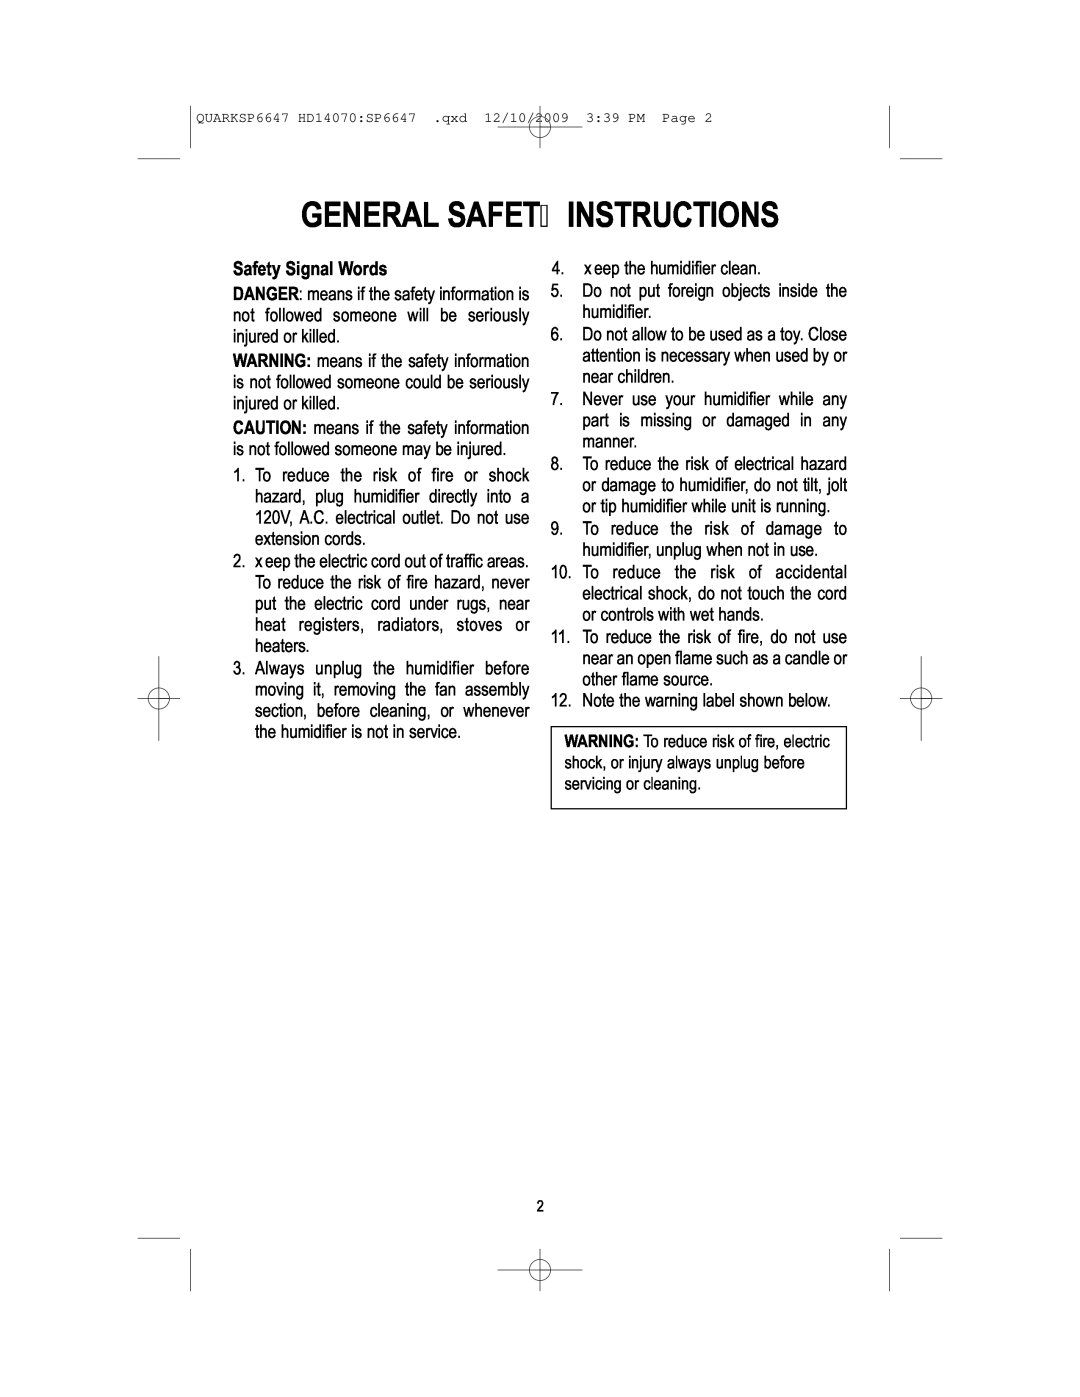 MoistAir HD14070 owner manual General Safety Instructions, Safety Signal Words 